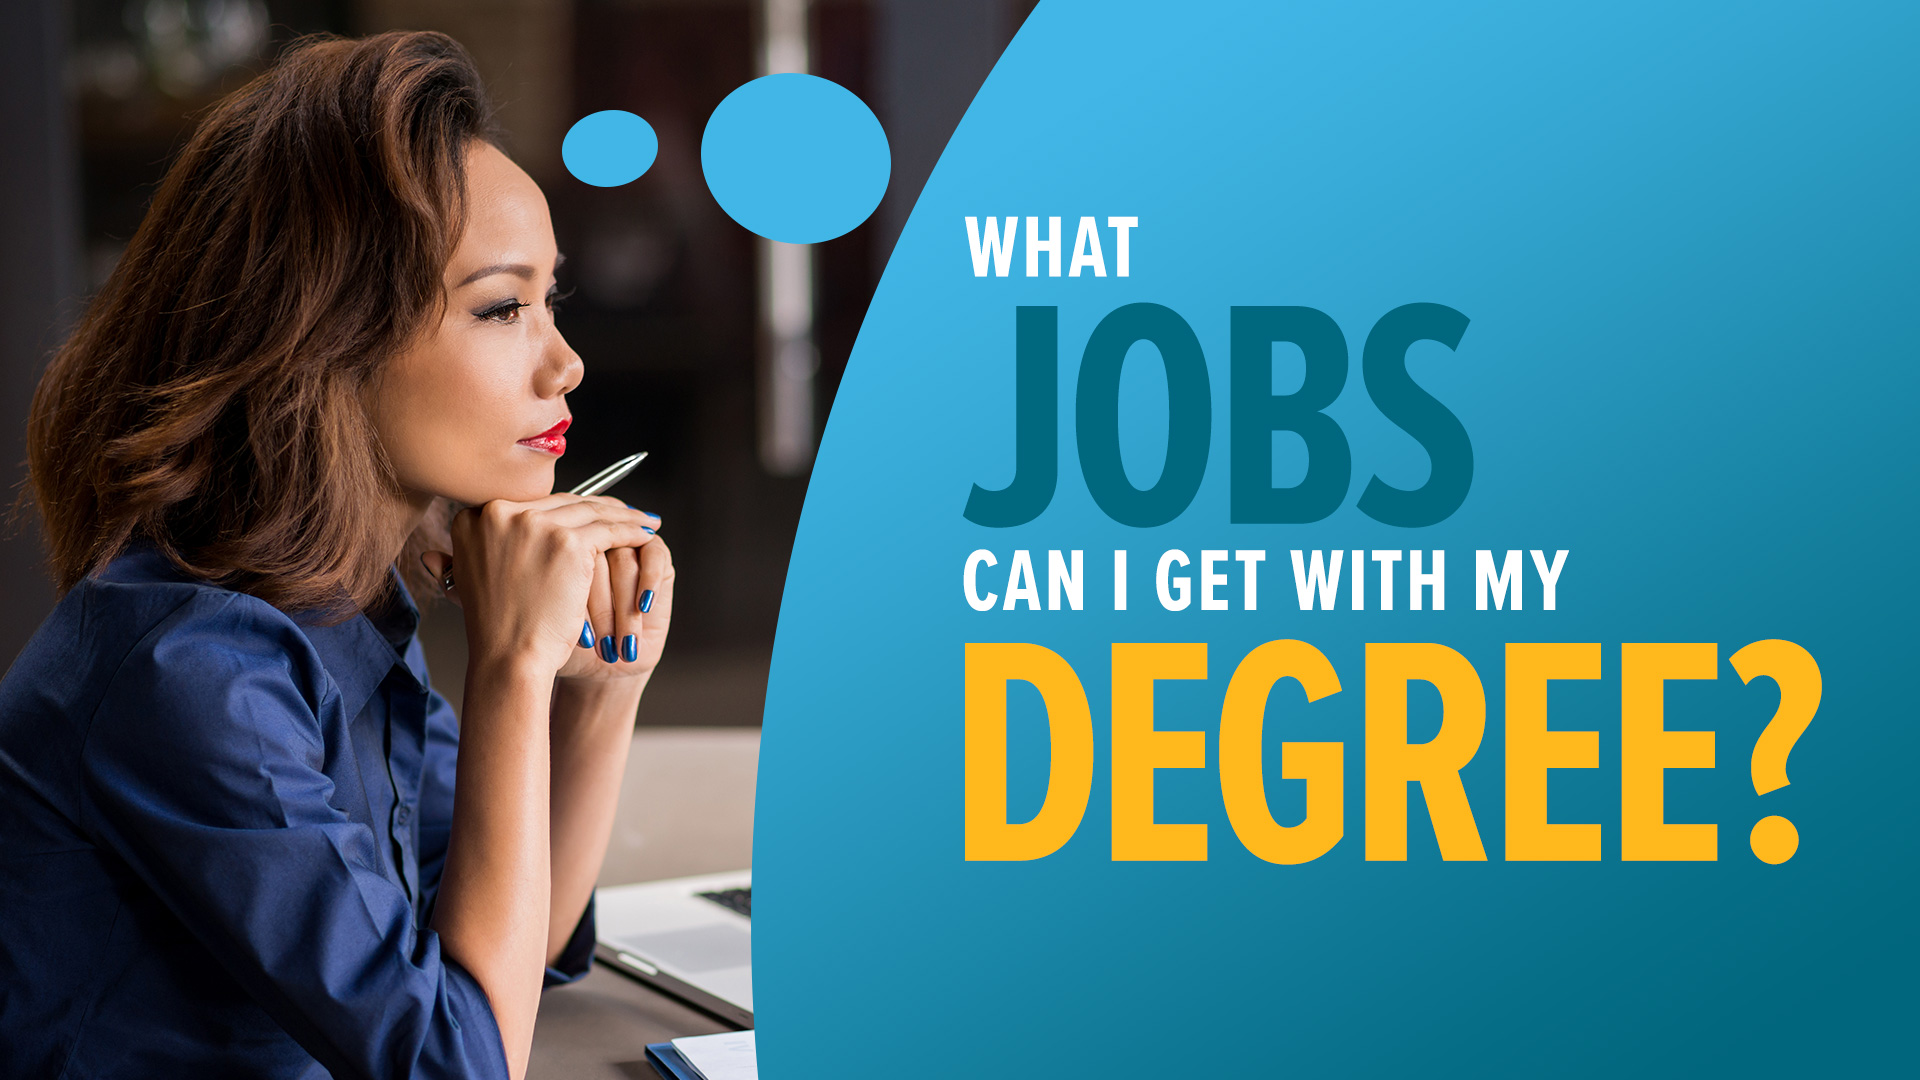 “What Jobs Can I Get With My Degree?”